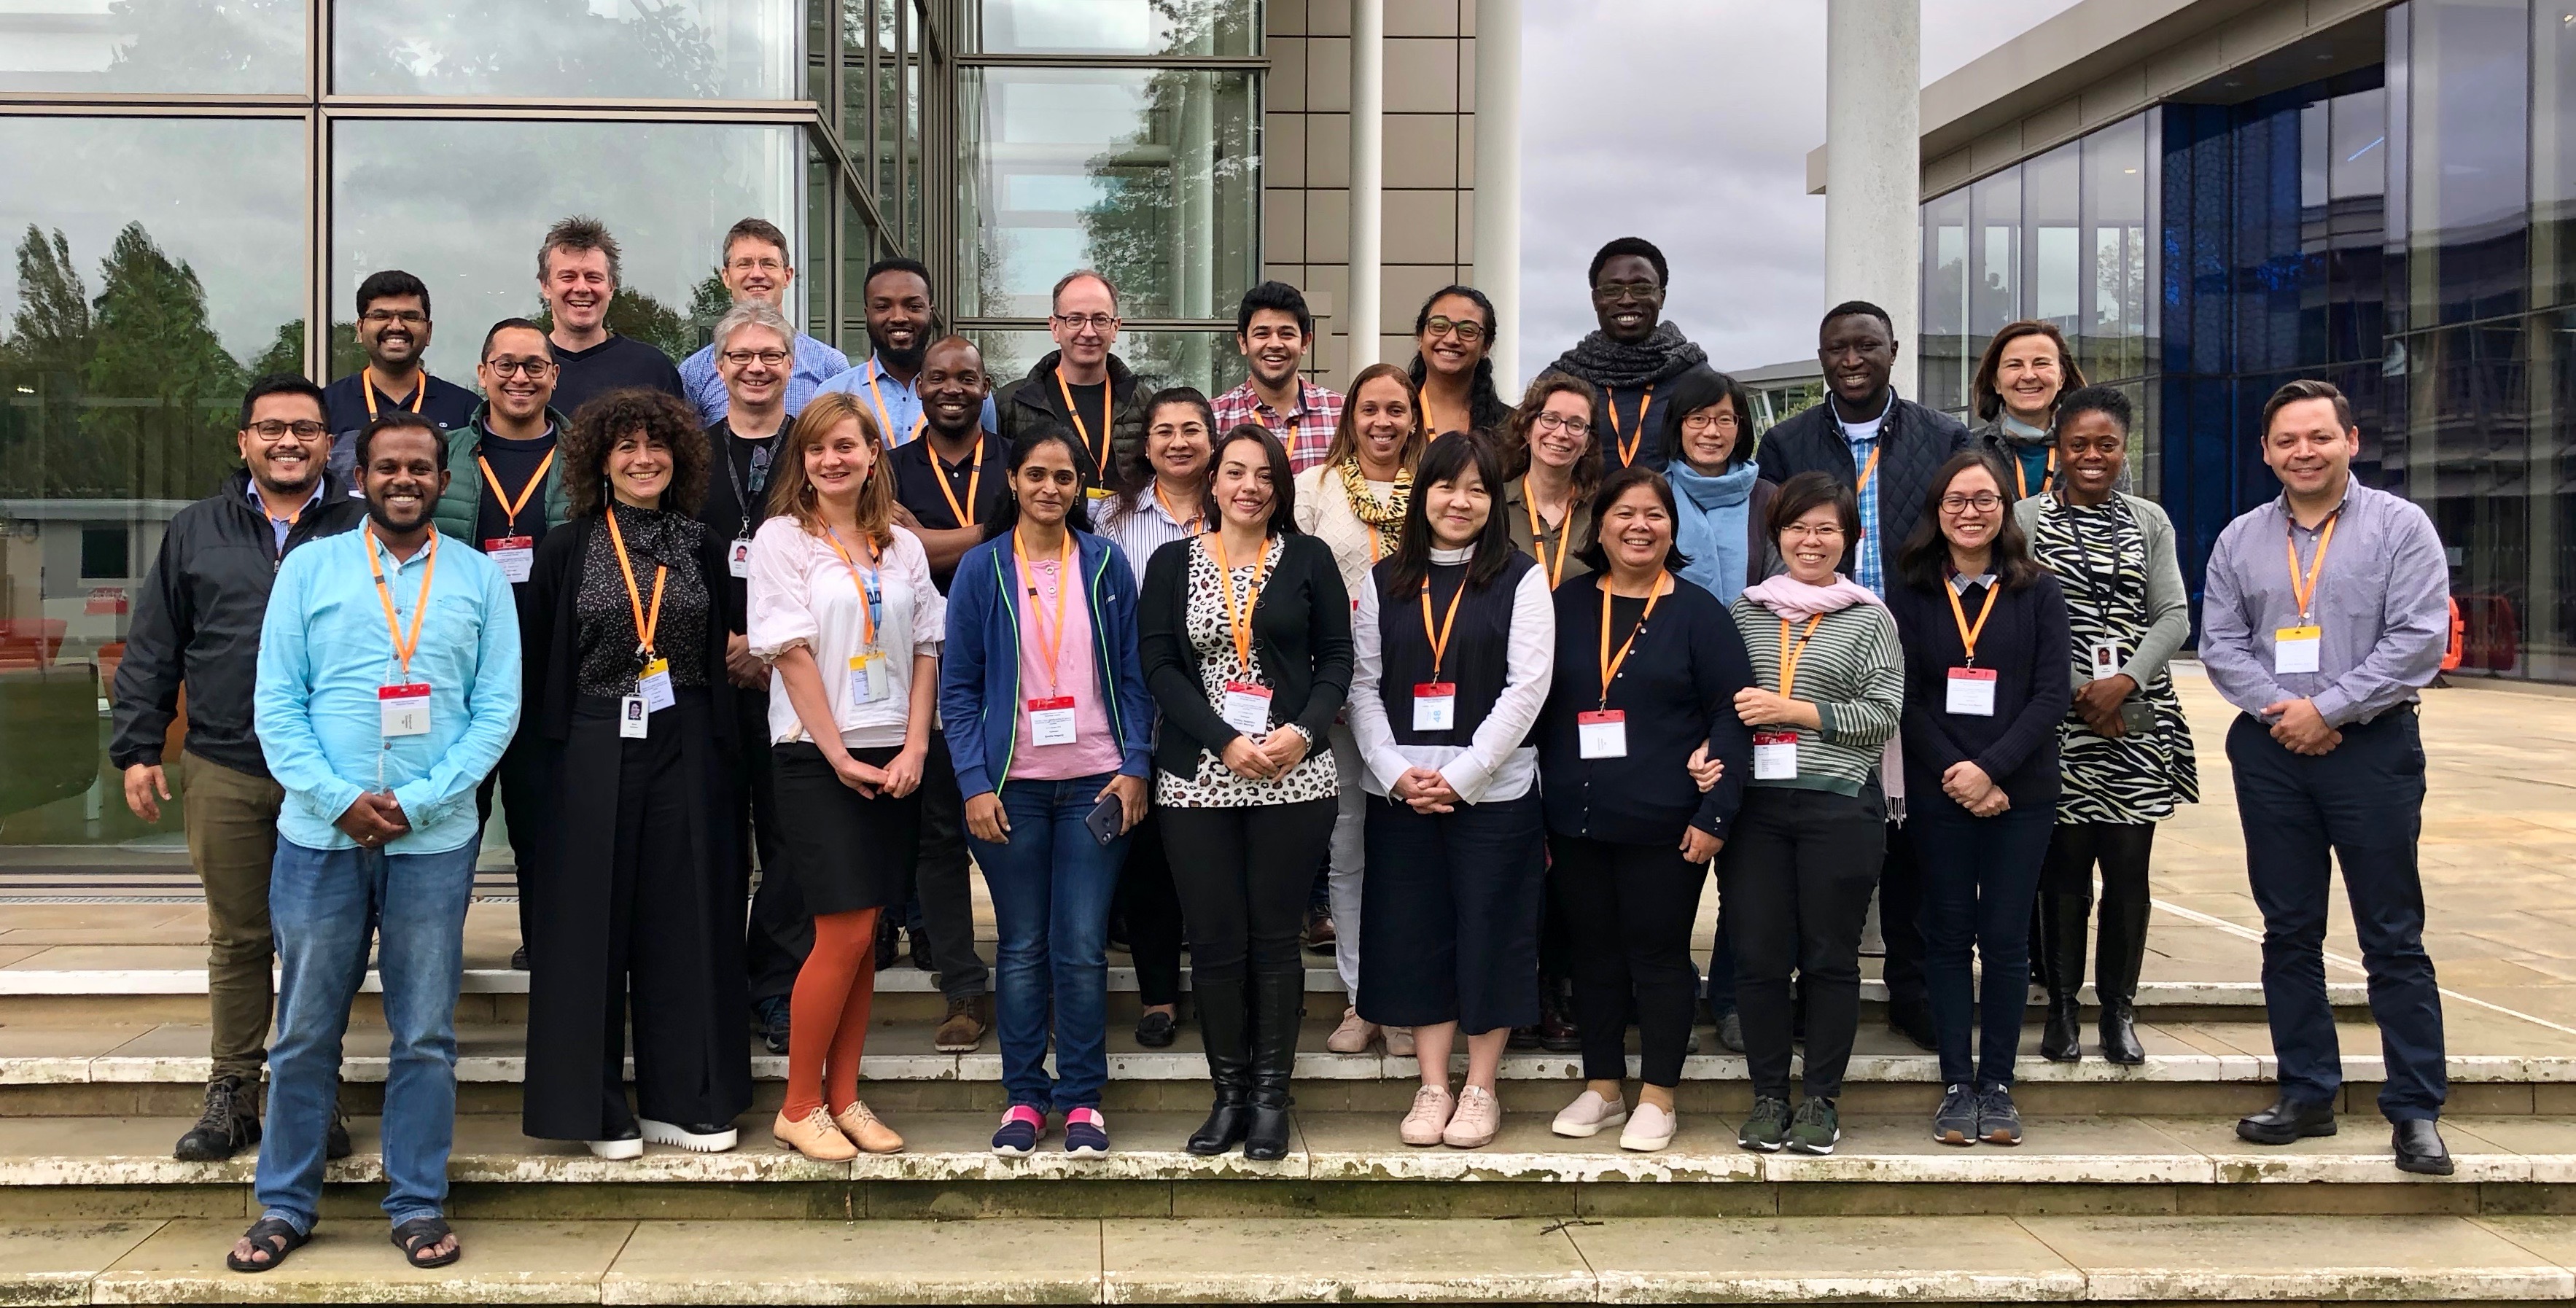 Participants at Train the Trainer: Capacity building for genomic surveillance of AMR in low- and middle-income countries 2019